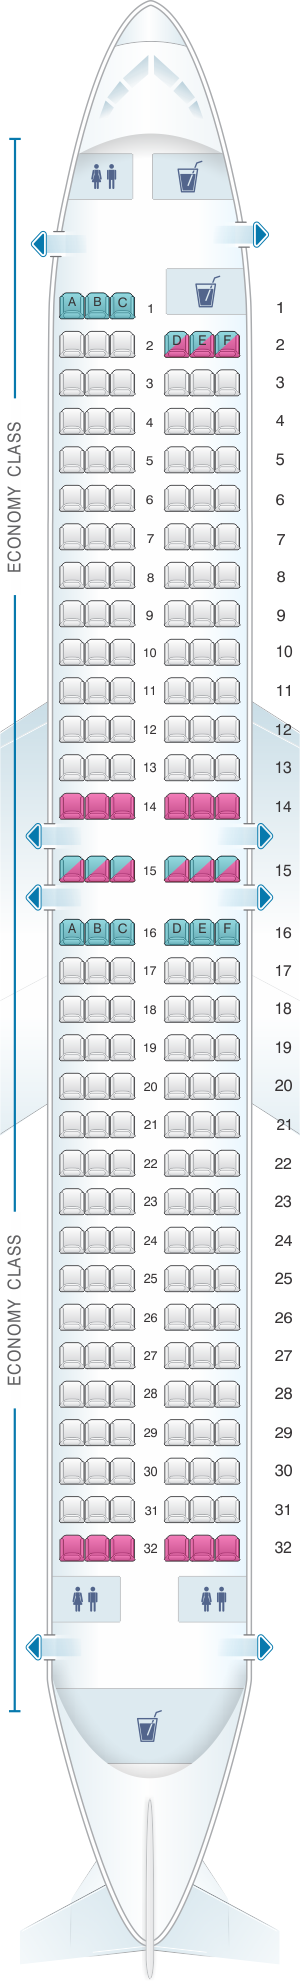 Boeing 737 800 Seating Plan Thomson | Awesome Home